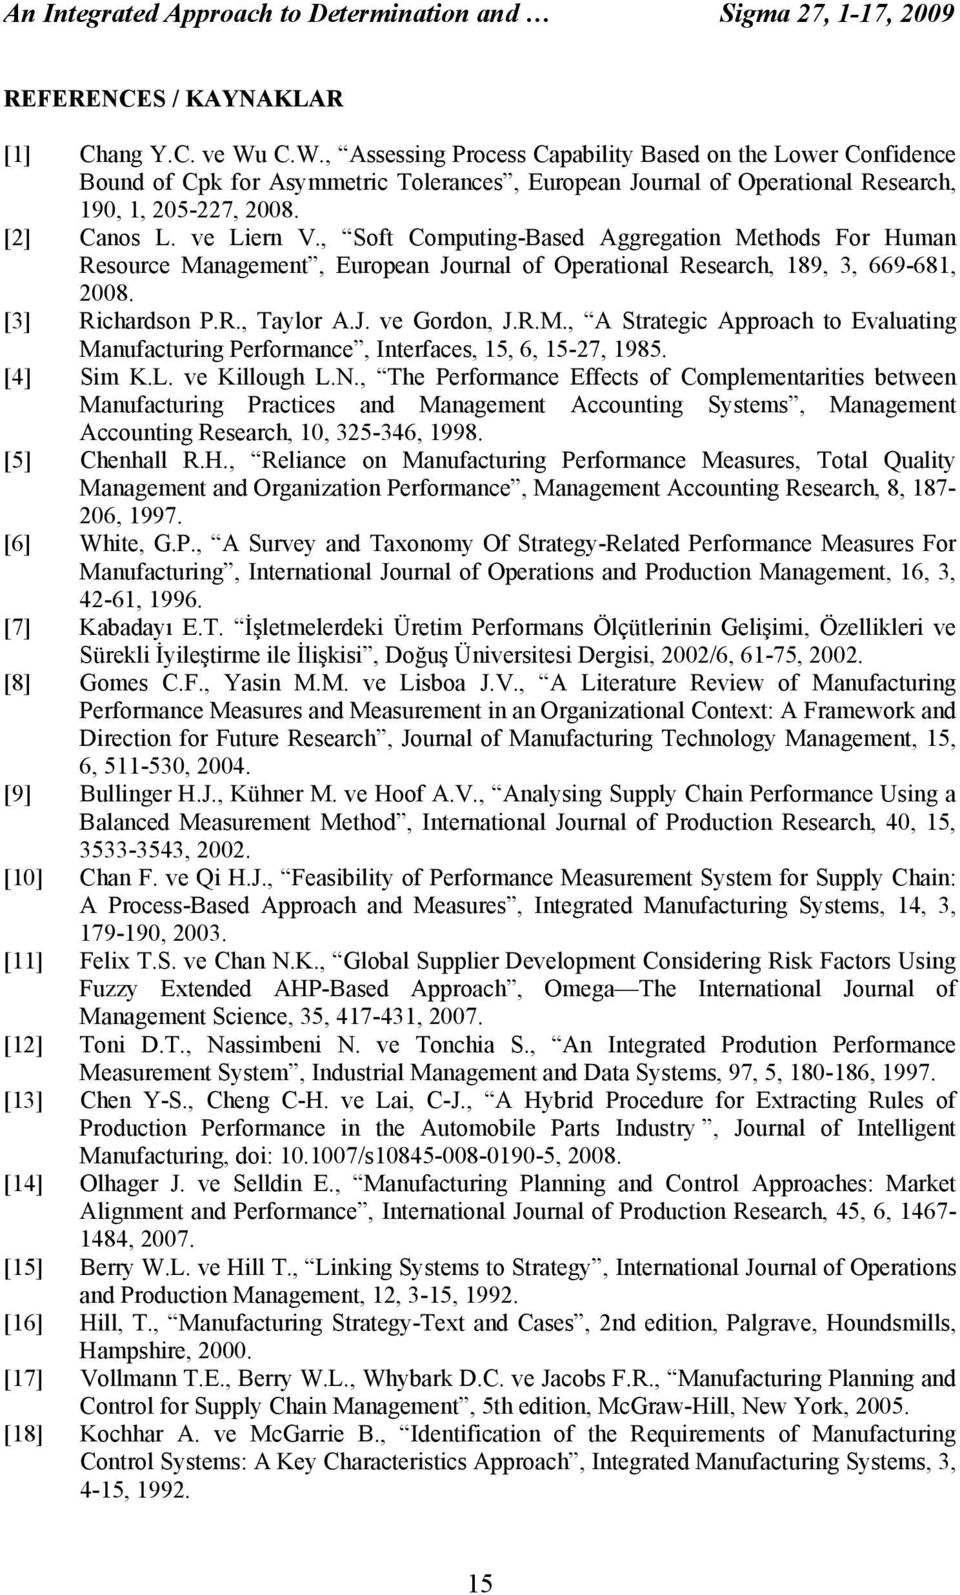 , Soft Computing-Based Aggregation Methods For Human Resource Management, European Journal of Operational Research, 89, 3, 669-68, 008. [3] Richardson P.R., Taylor A.J. ve Gordon, J.R.M., A Strategic Approach to Evaluating Manufacturing Performance, Interfaces, 5, 6, 5-7, 985.